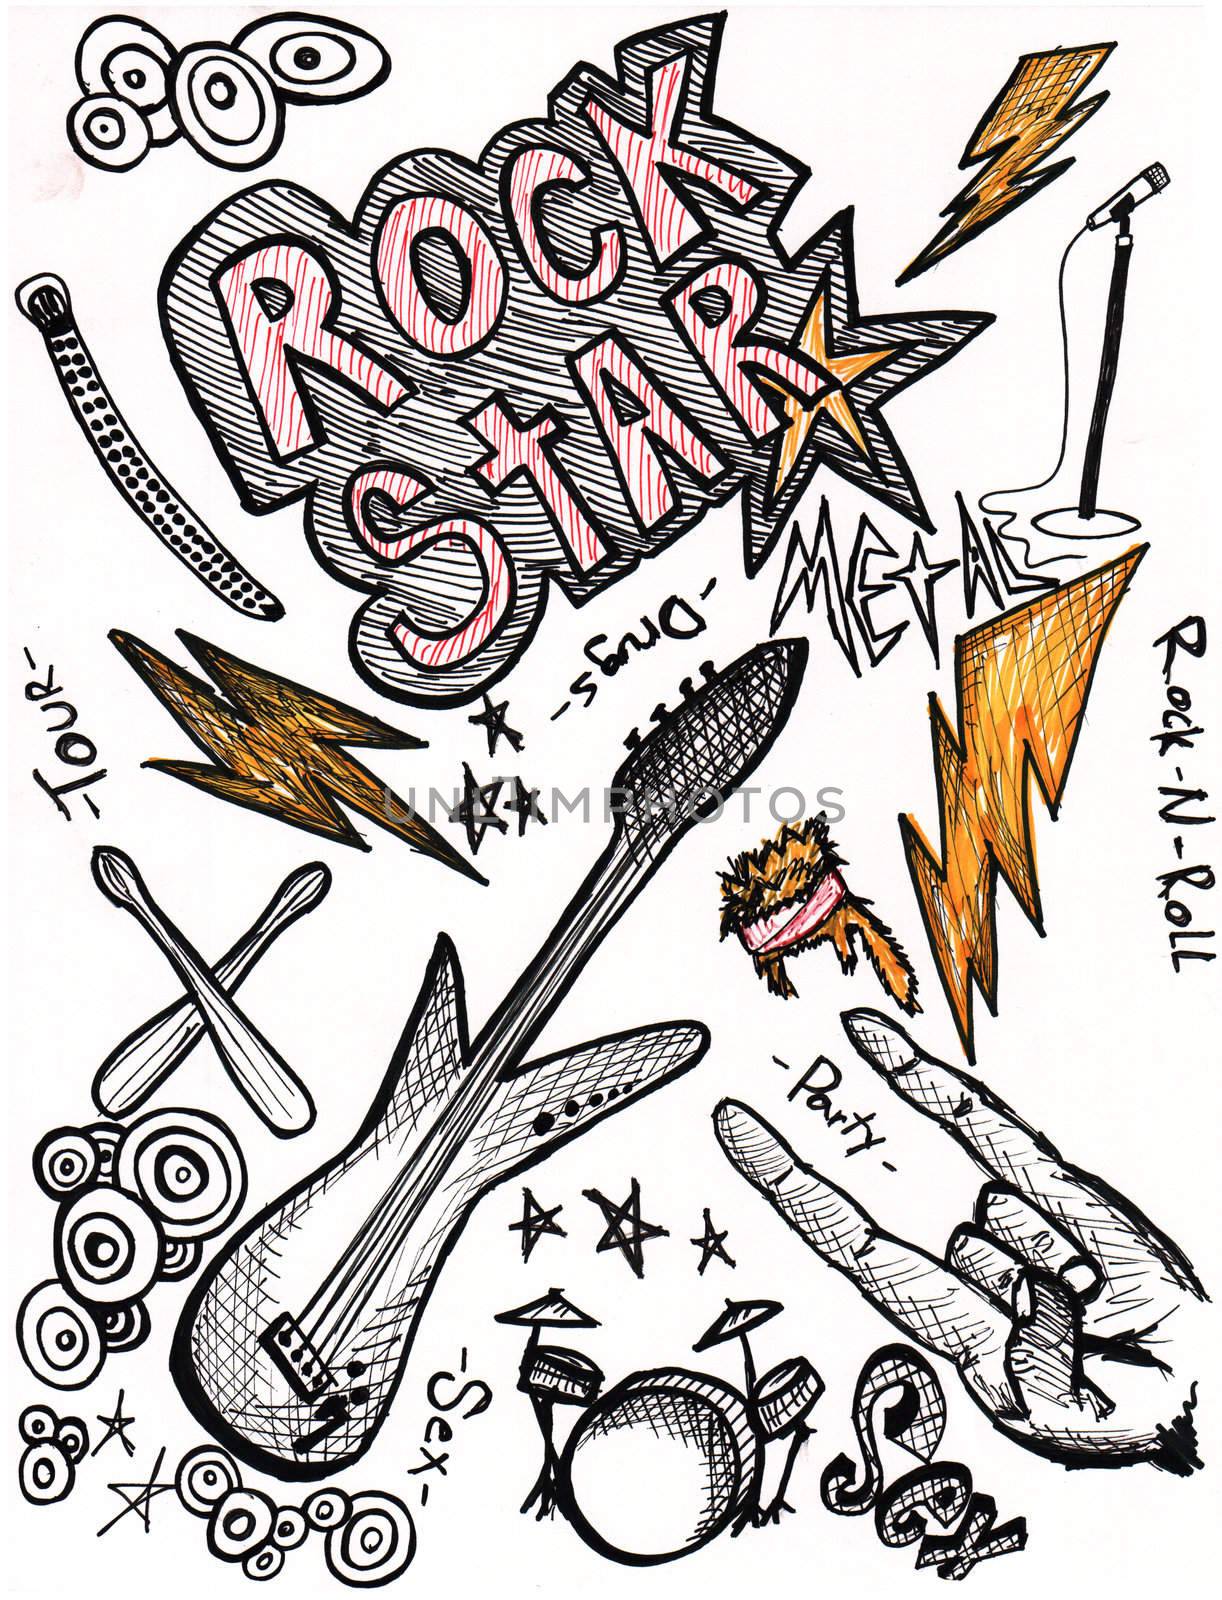 Rock Star hand drawing doodles by jeremywhat